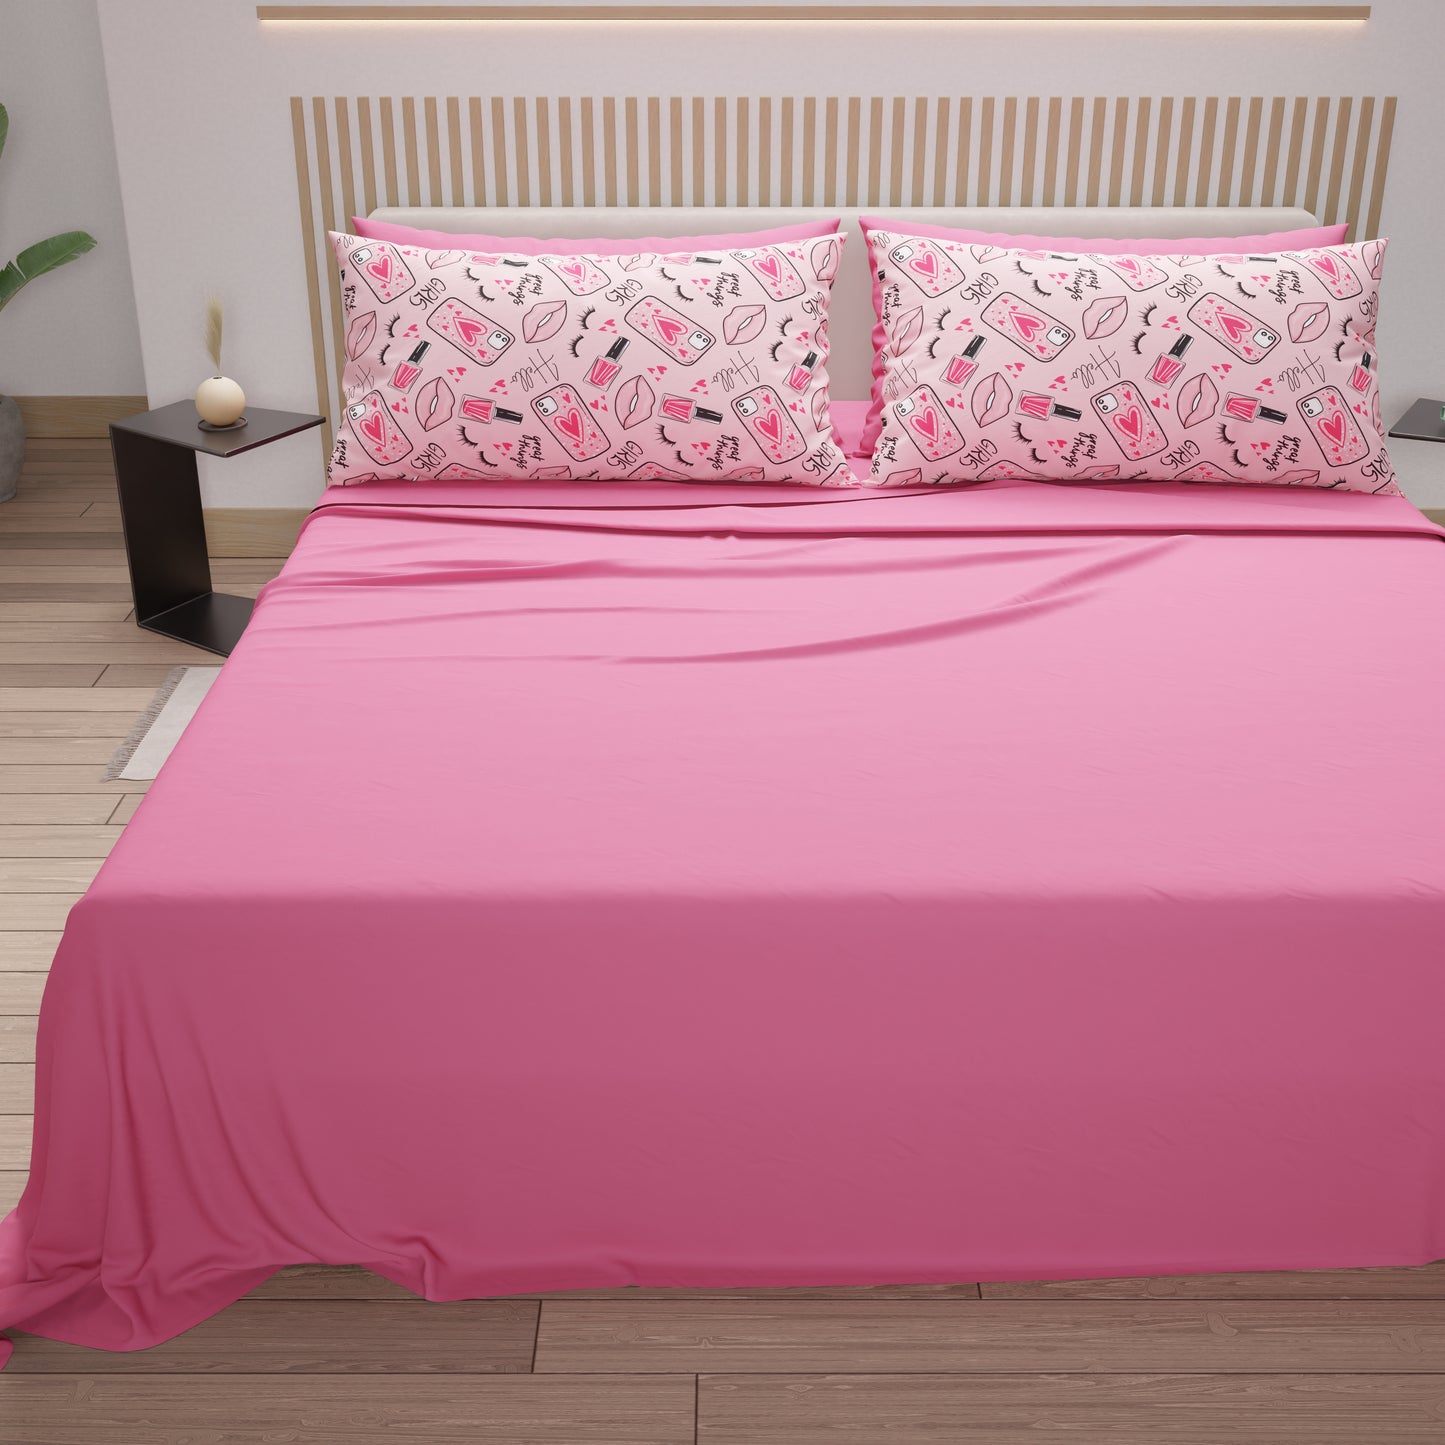 Cotton Sheets, Bed Set with Pink Lipstick Digital Print Pillowcases